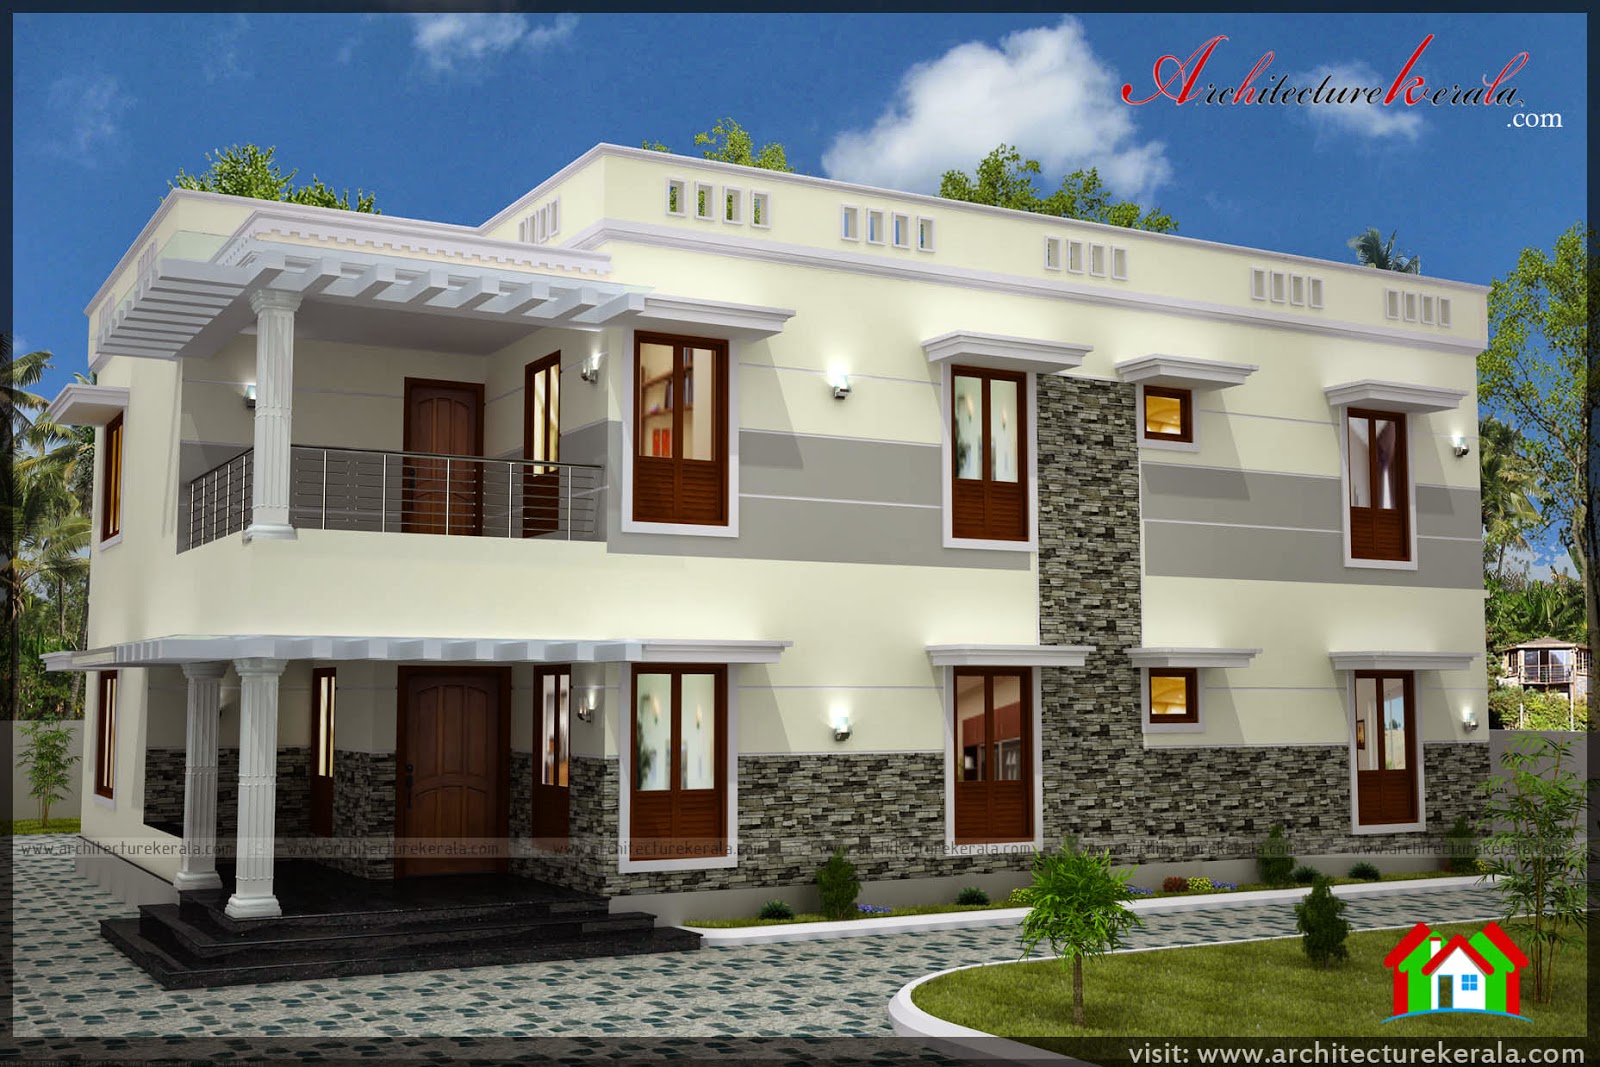  FIVE  BEDROOM  HOUSE  PLAN  IMAGE AND ELEVATION  ARCHITECTURE 